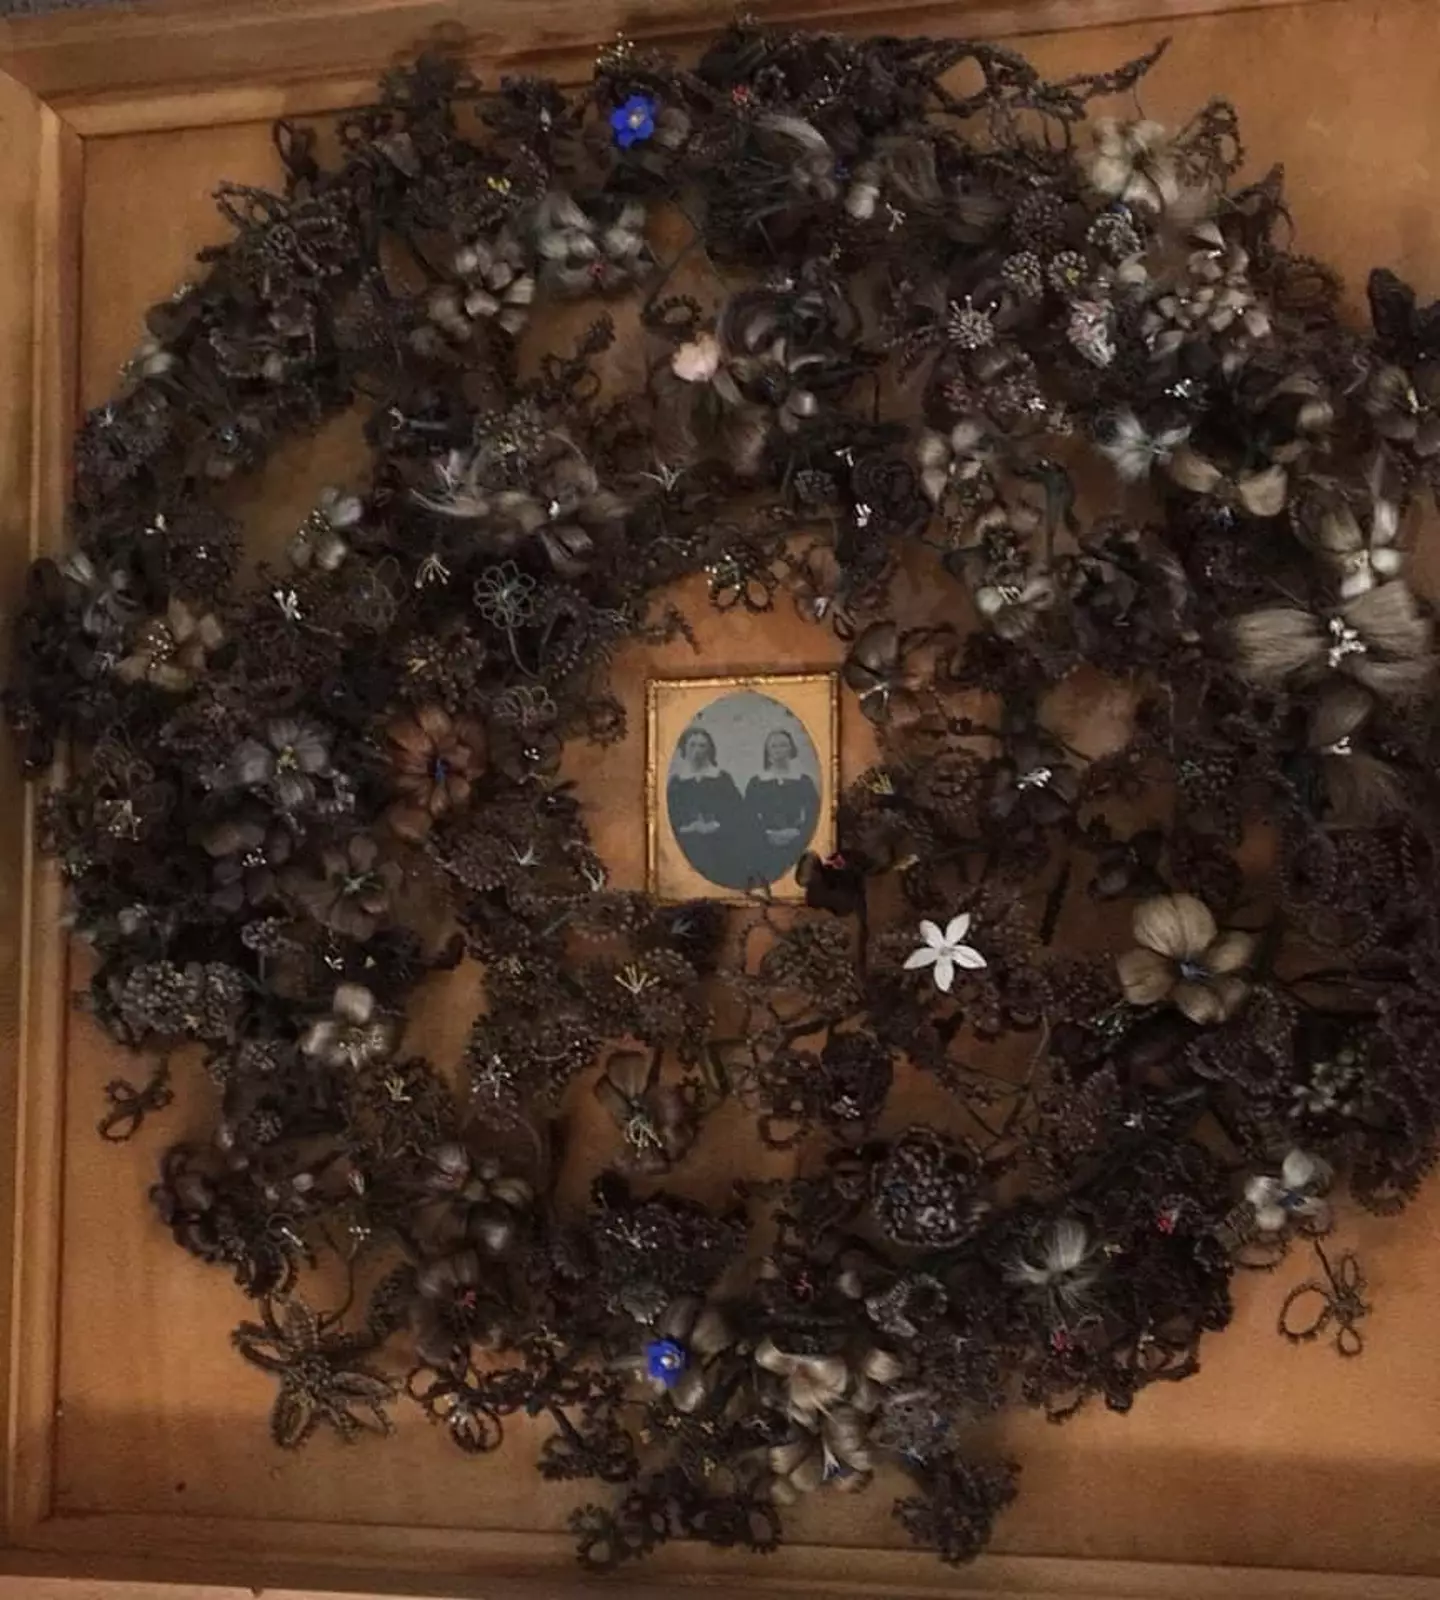 One of the Victorian hair wreaths in Beckie-Ann's home.